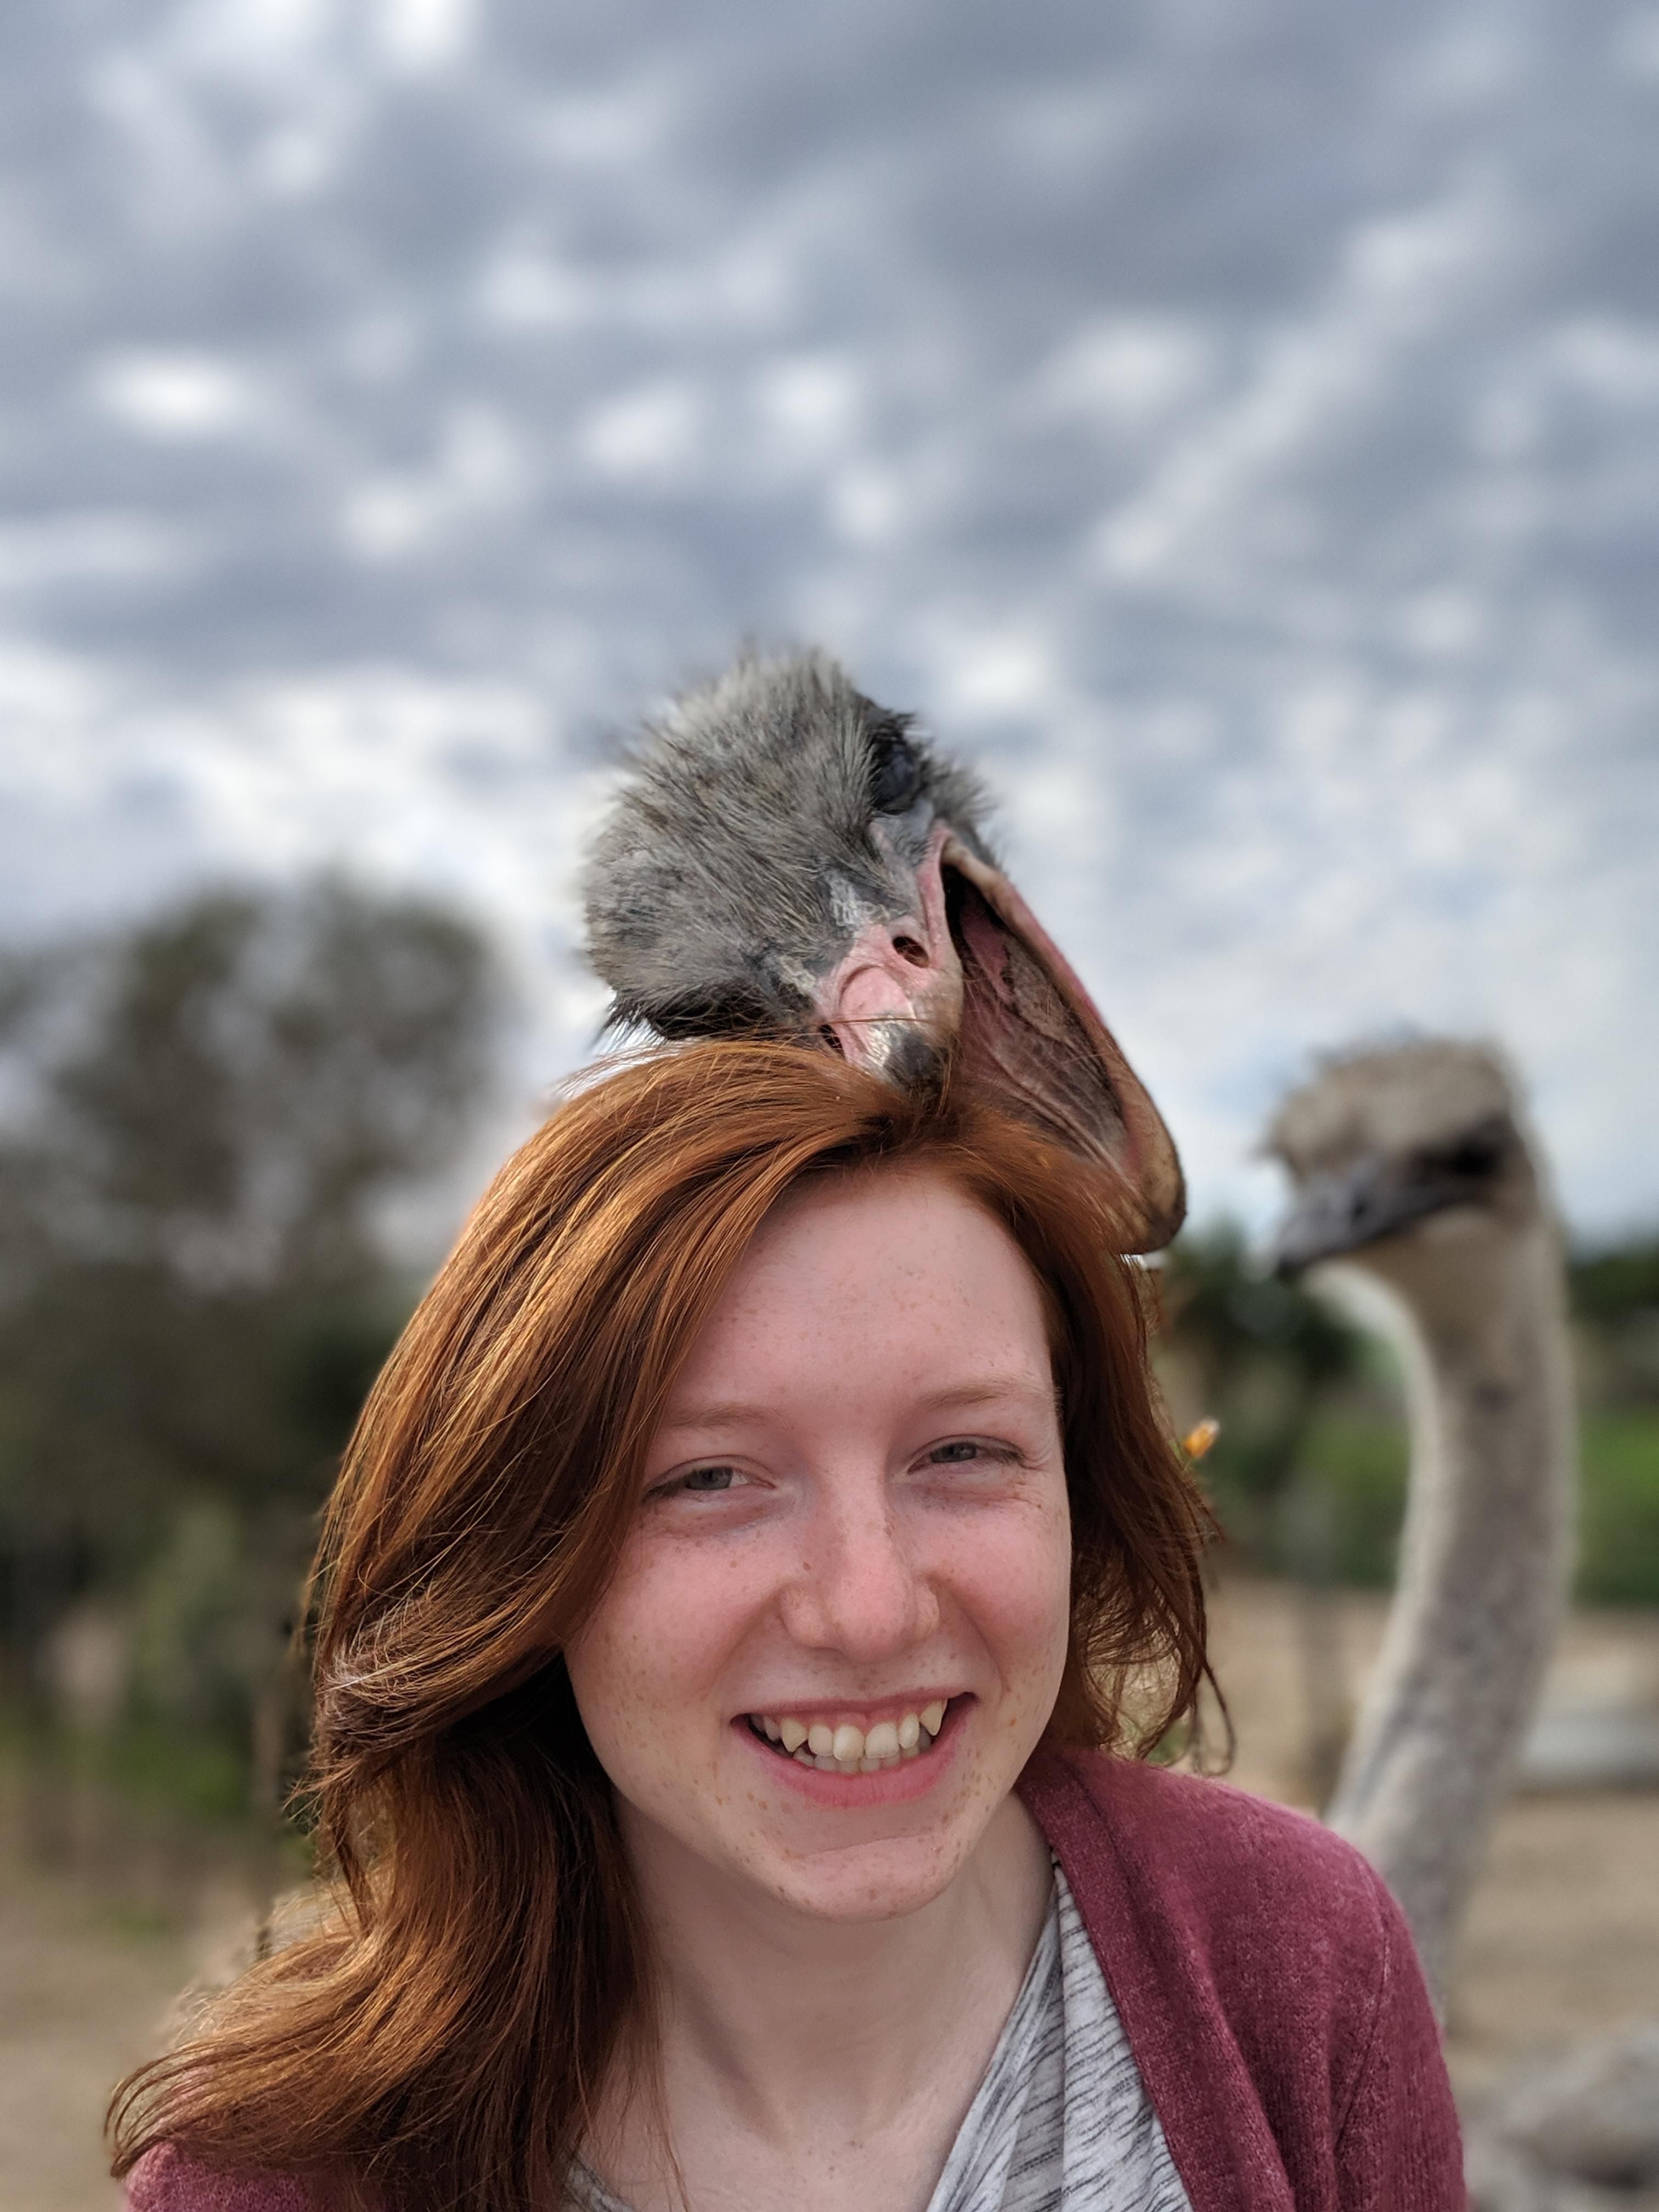 My wife's first ostrich encounter.